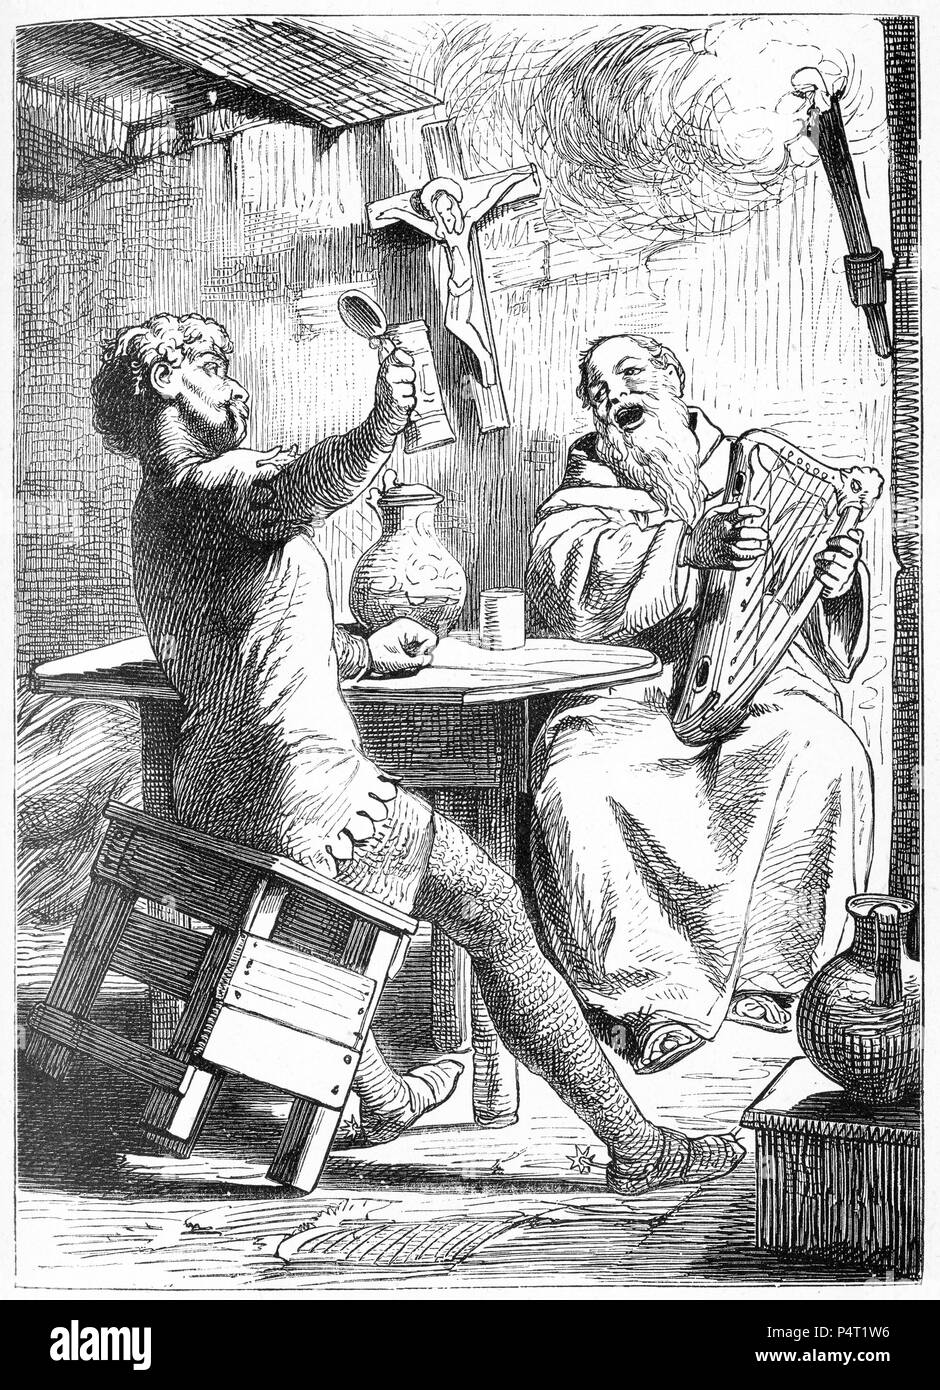 Engraving of two men singing and making merry in medieval England. From Ivanhoe Stock Photo